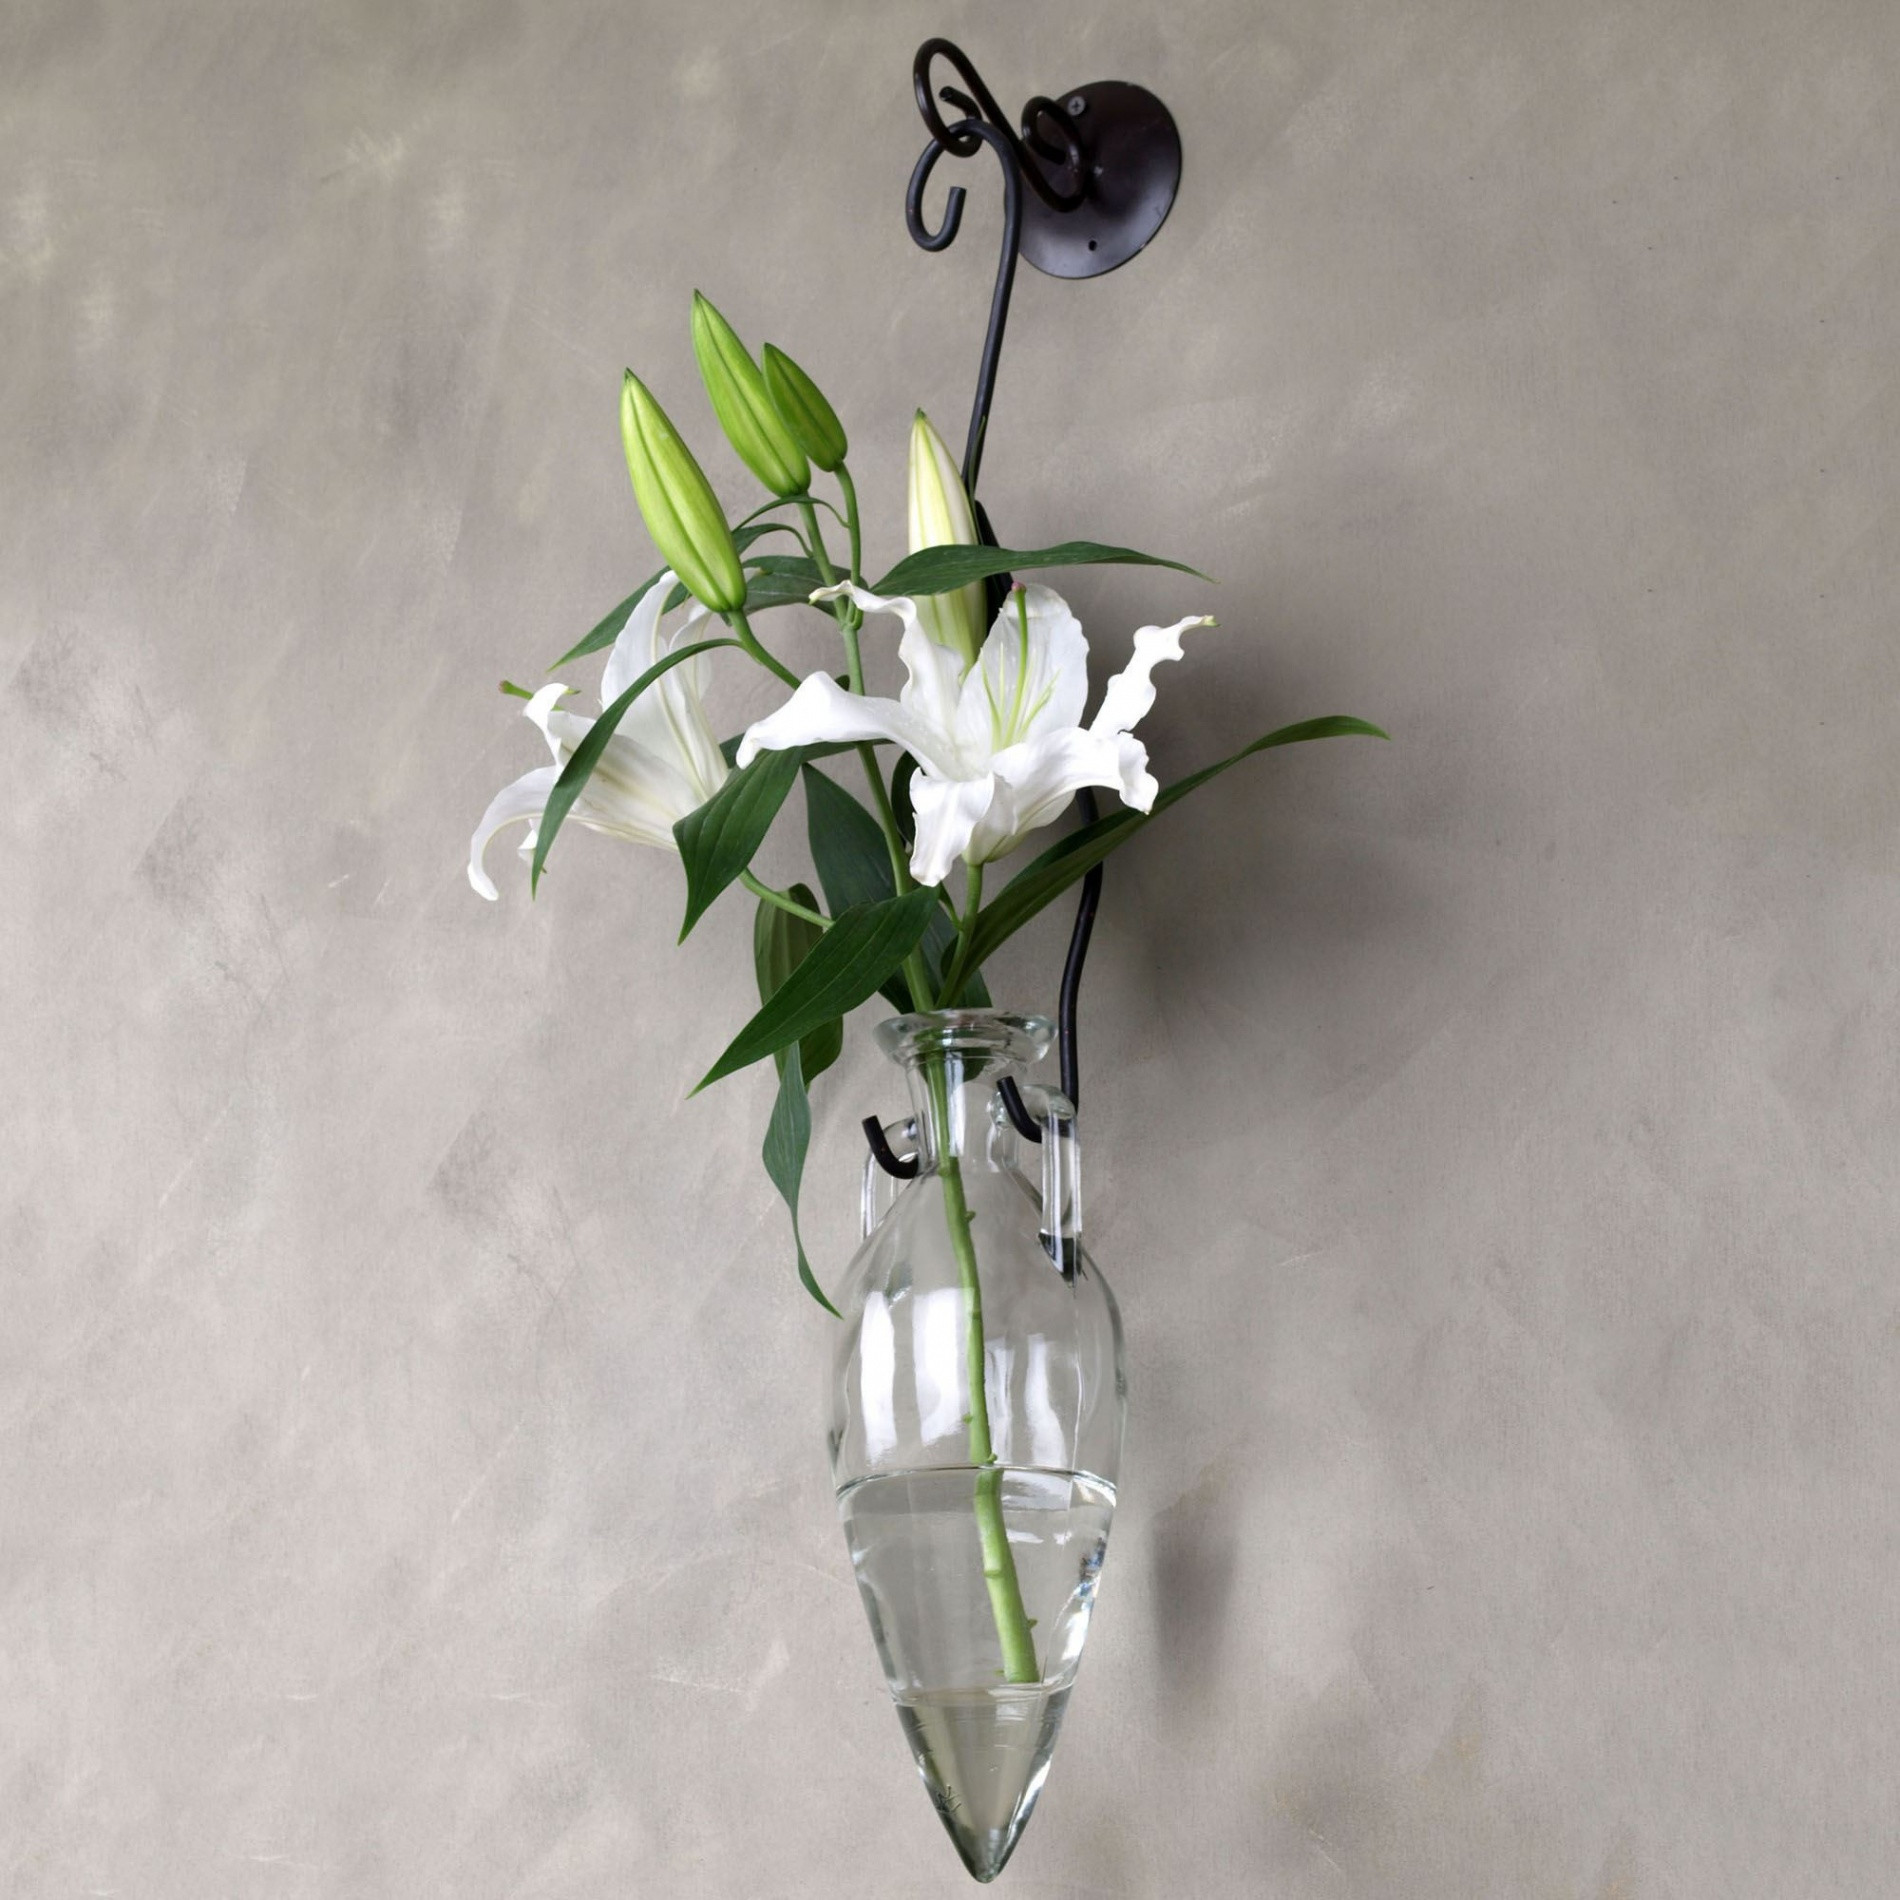 28 Recommended Tall Flower Vases 2024 free download tall flower vases of h vases wall hanging flower vase newspaper i 0d scheme wall scheme intended for h vases wall hanging flower vase newspaper i 0d scheme wall scheme vase blanc deco